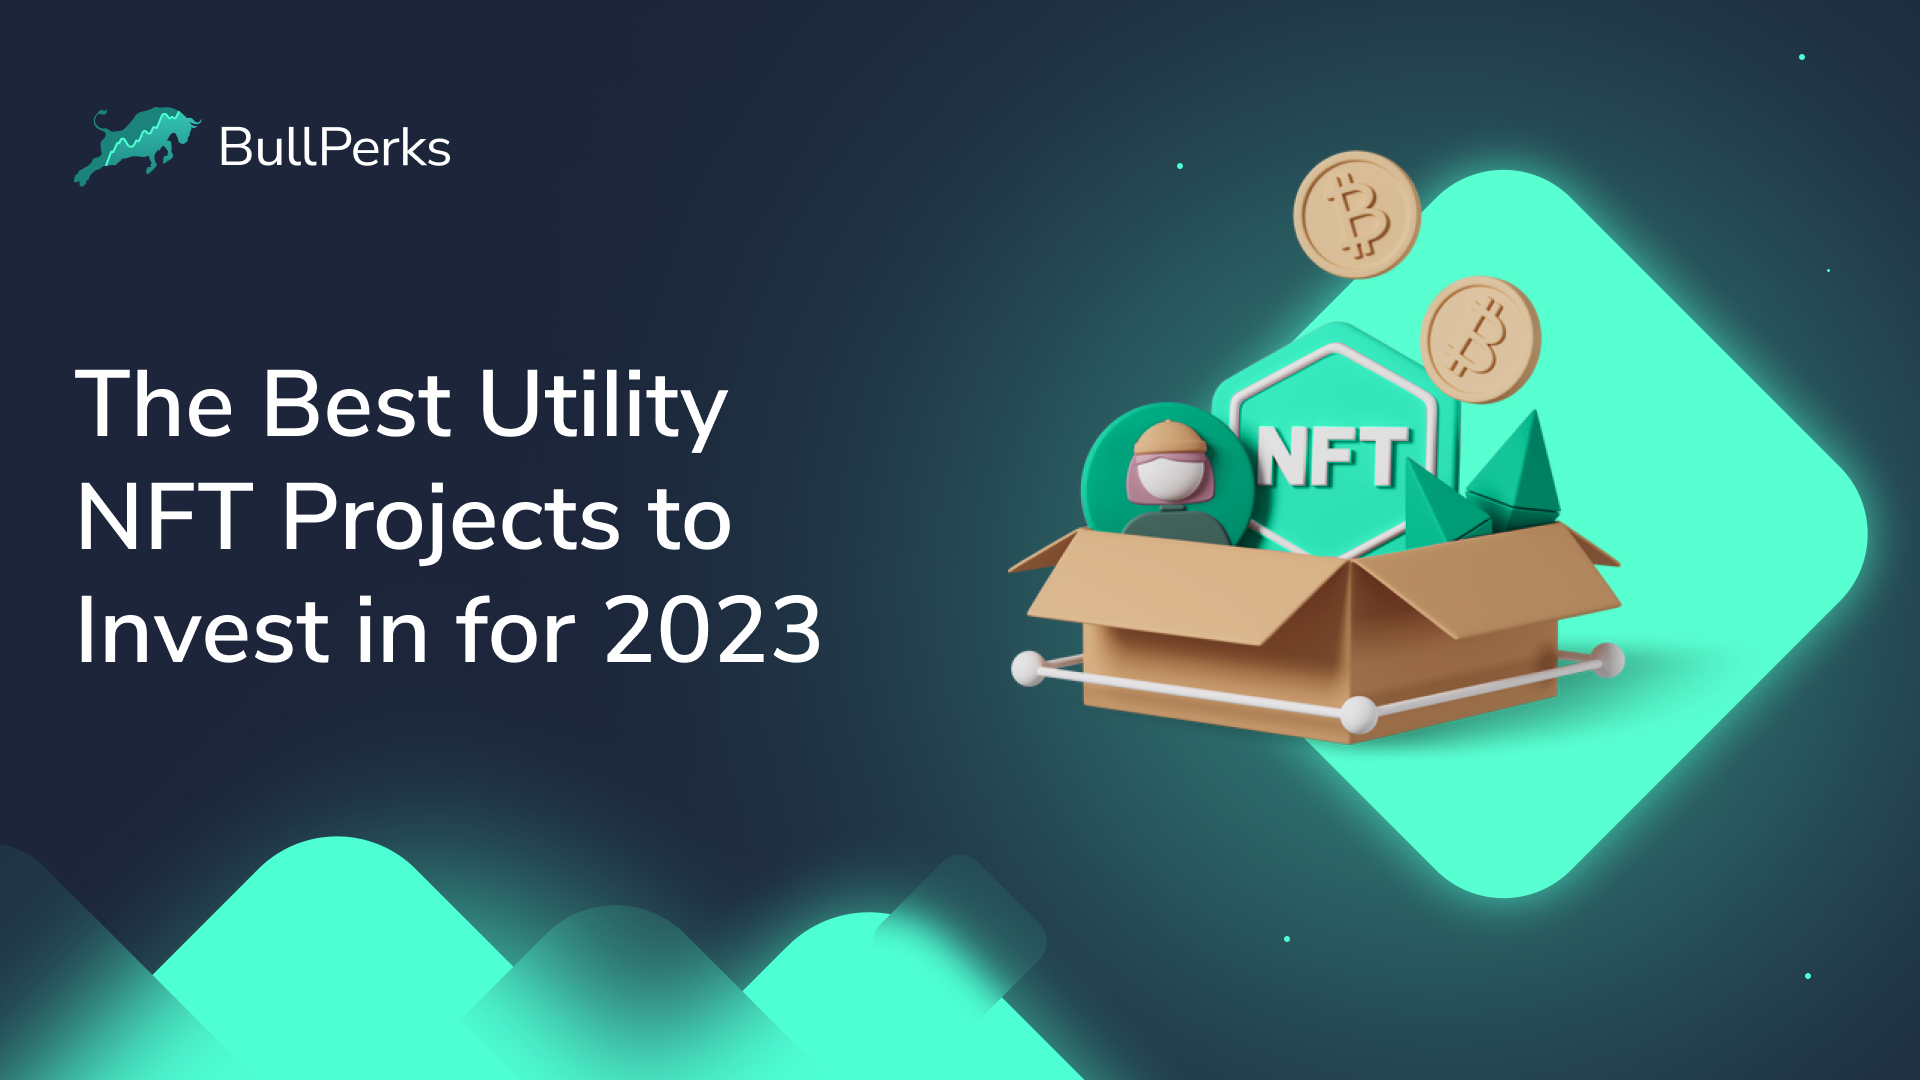 The Best Utility NFT Projects to Invest in for 2023 1 BullPerks